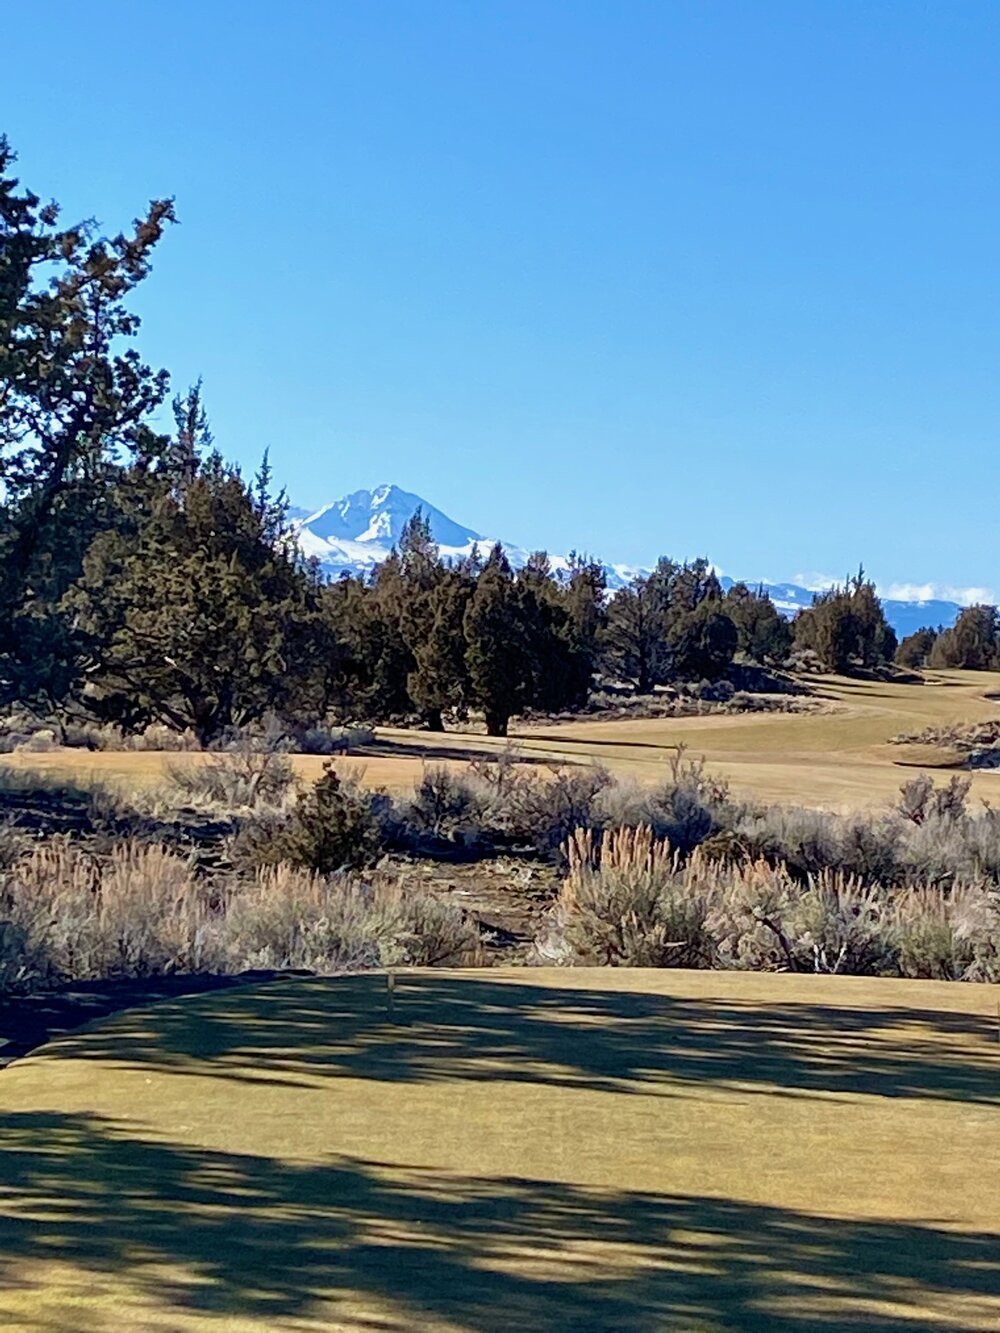  The 15th tee box at Pronghorn Golf Club in Bend, Oregon.  